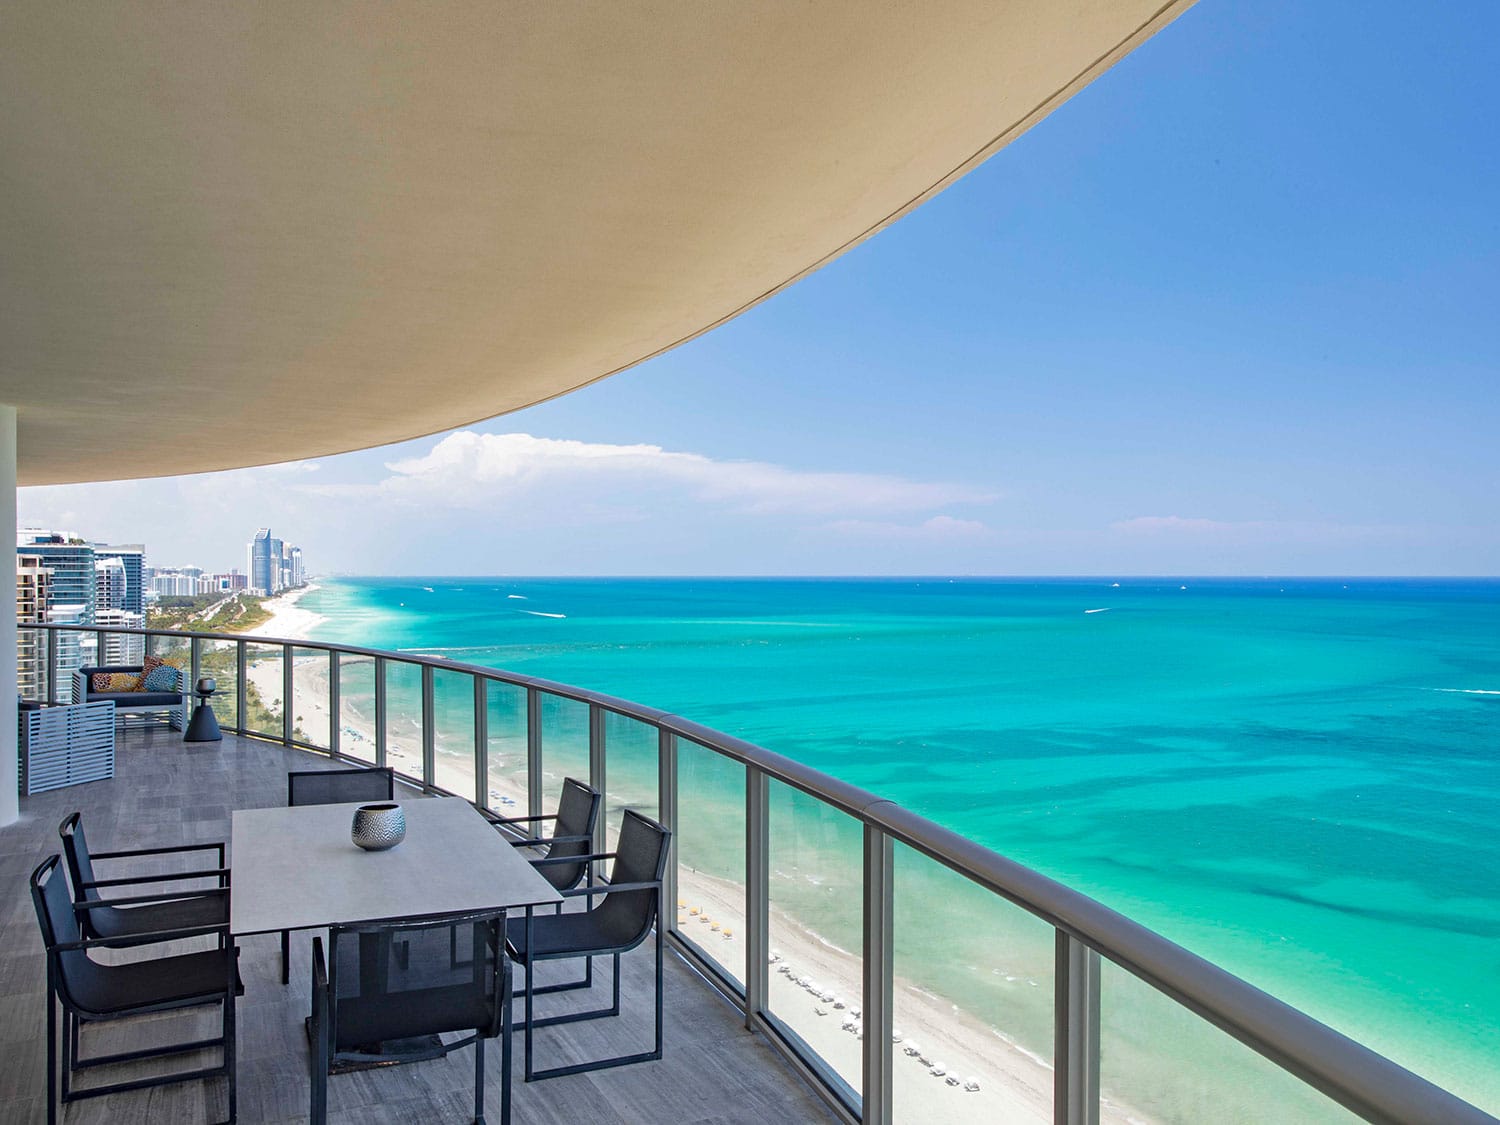 The view from the terrace of the presidential suite at the St. Regis Bal Harbour Resort in the South Florida village of Bal Harbour.